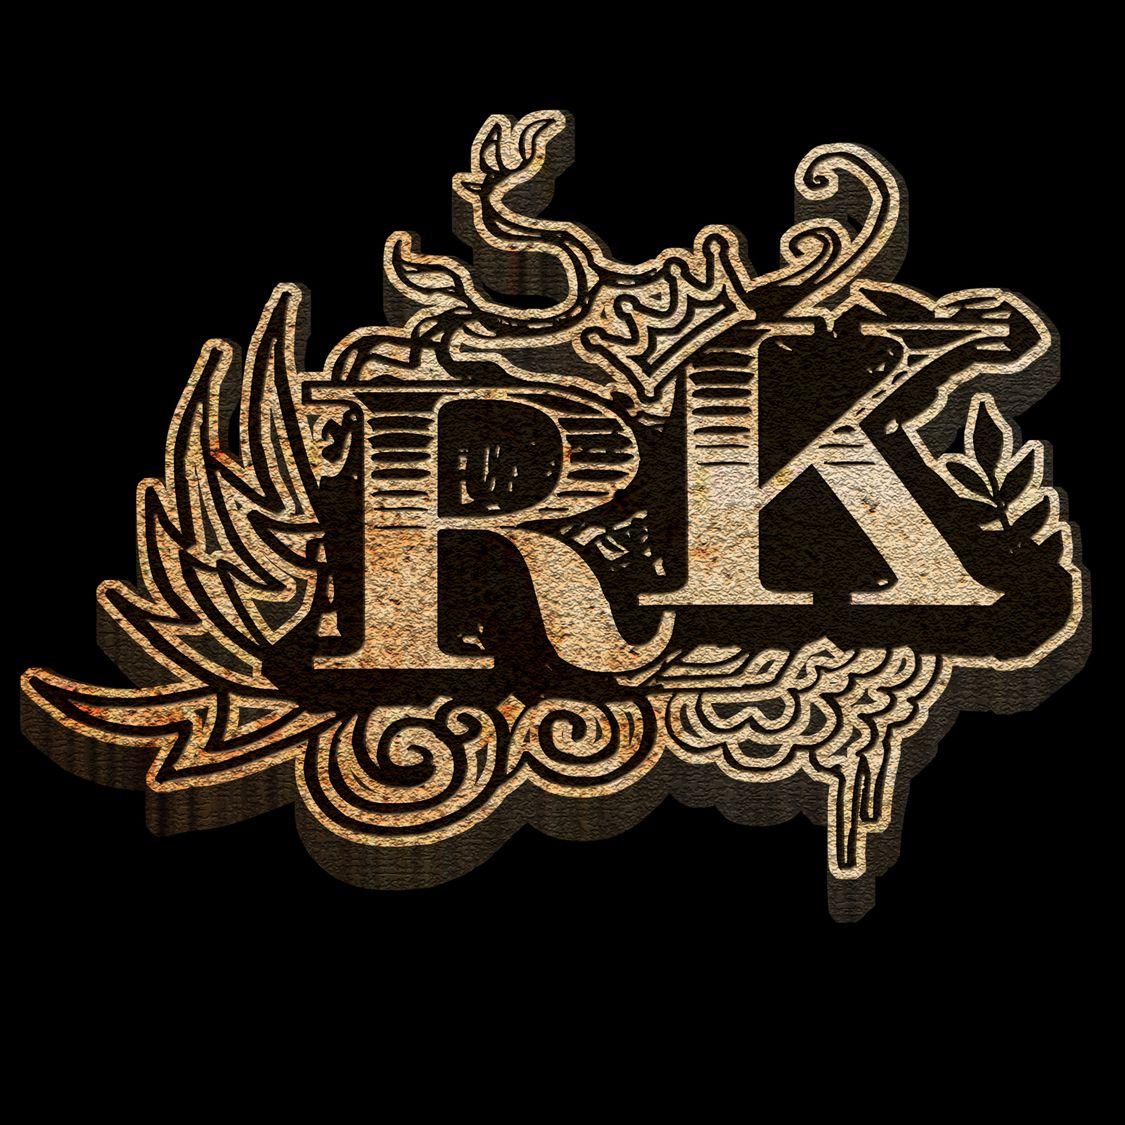 R K 3D Wallpaper 22 With R K 3D Wallpaper image picture. Free